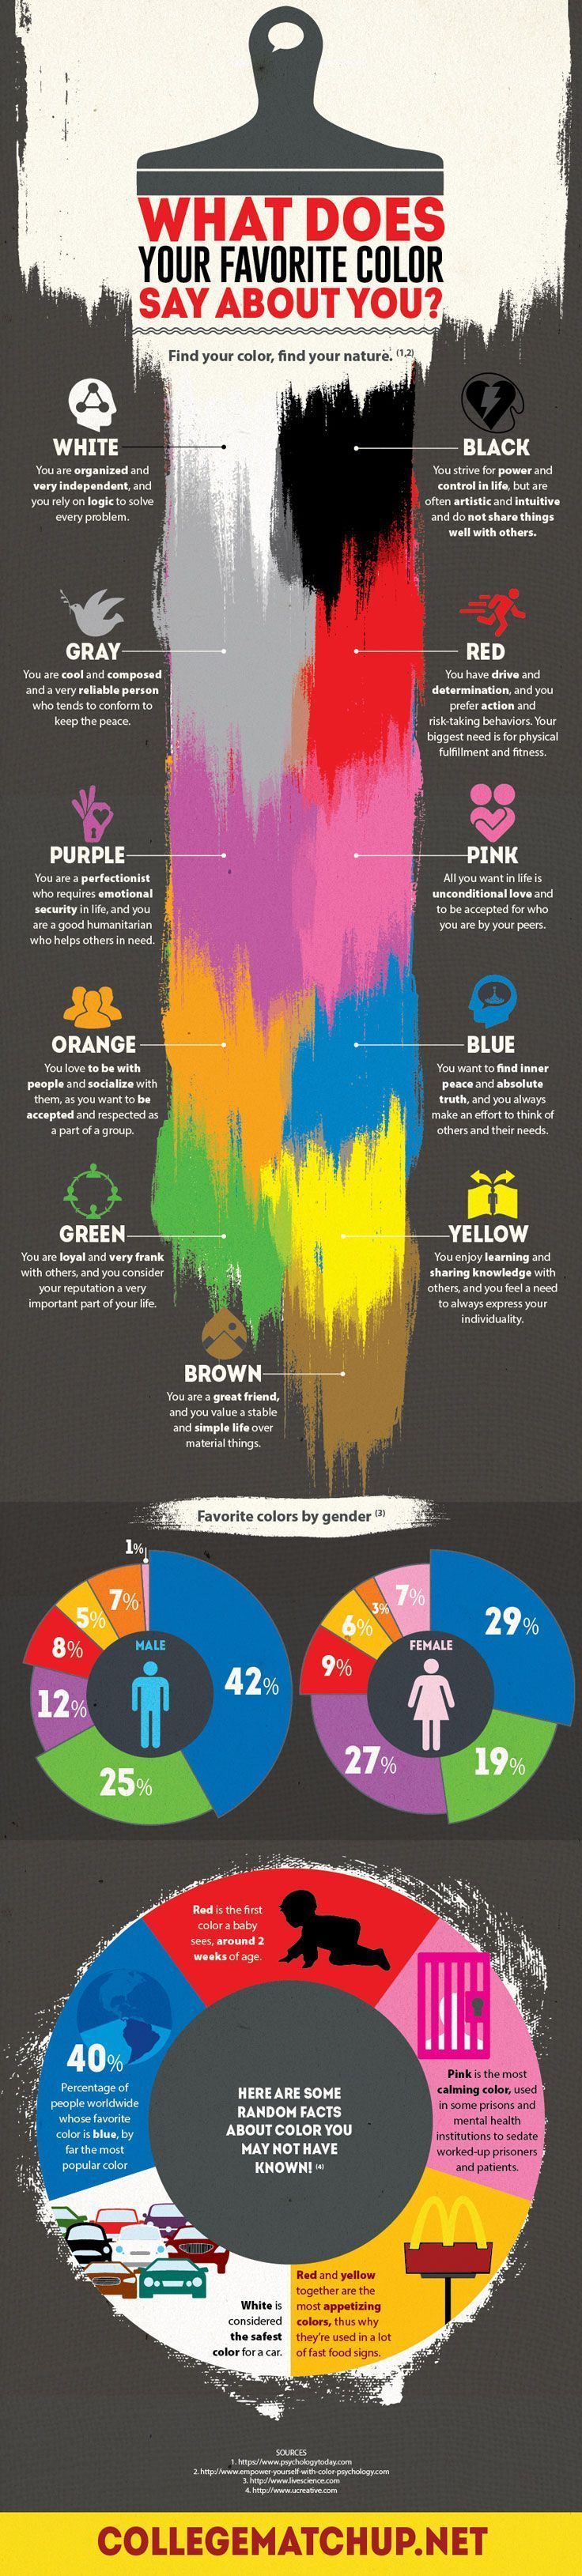 1531969086_772_Marketing-Infographic-Got-a-favorite-color-Well-what-does-your-favorite-color-say-about-you-Check-t Marketing Infographic : Important for color schemes and brand colors: What does your favorite color say ...